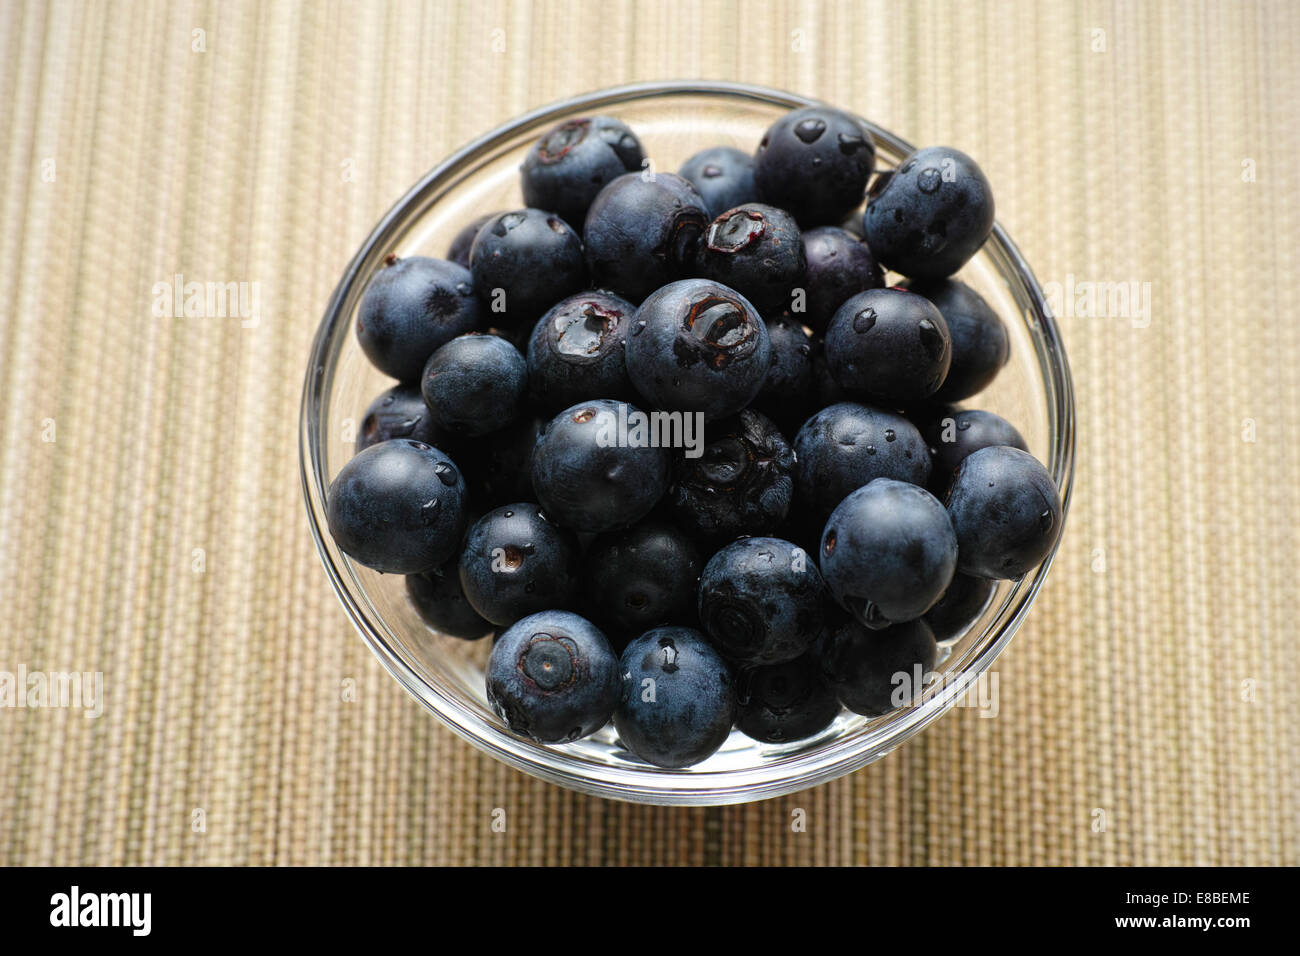 Blueberry in a bowl. Astonishing sharpness image. Medium format color rendering and image quality. Stock Photo